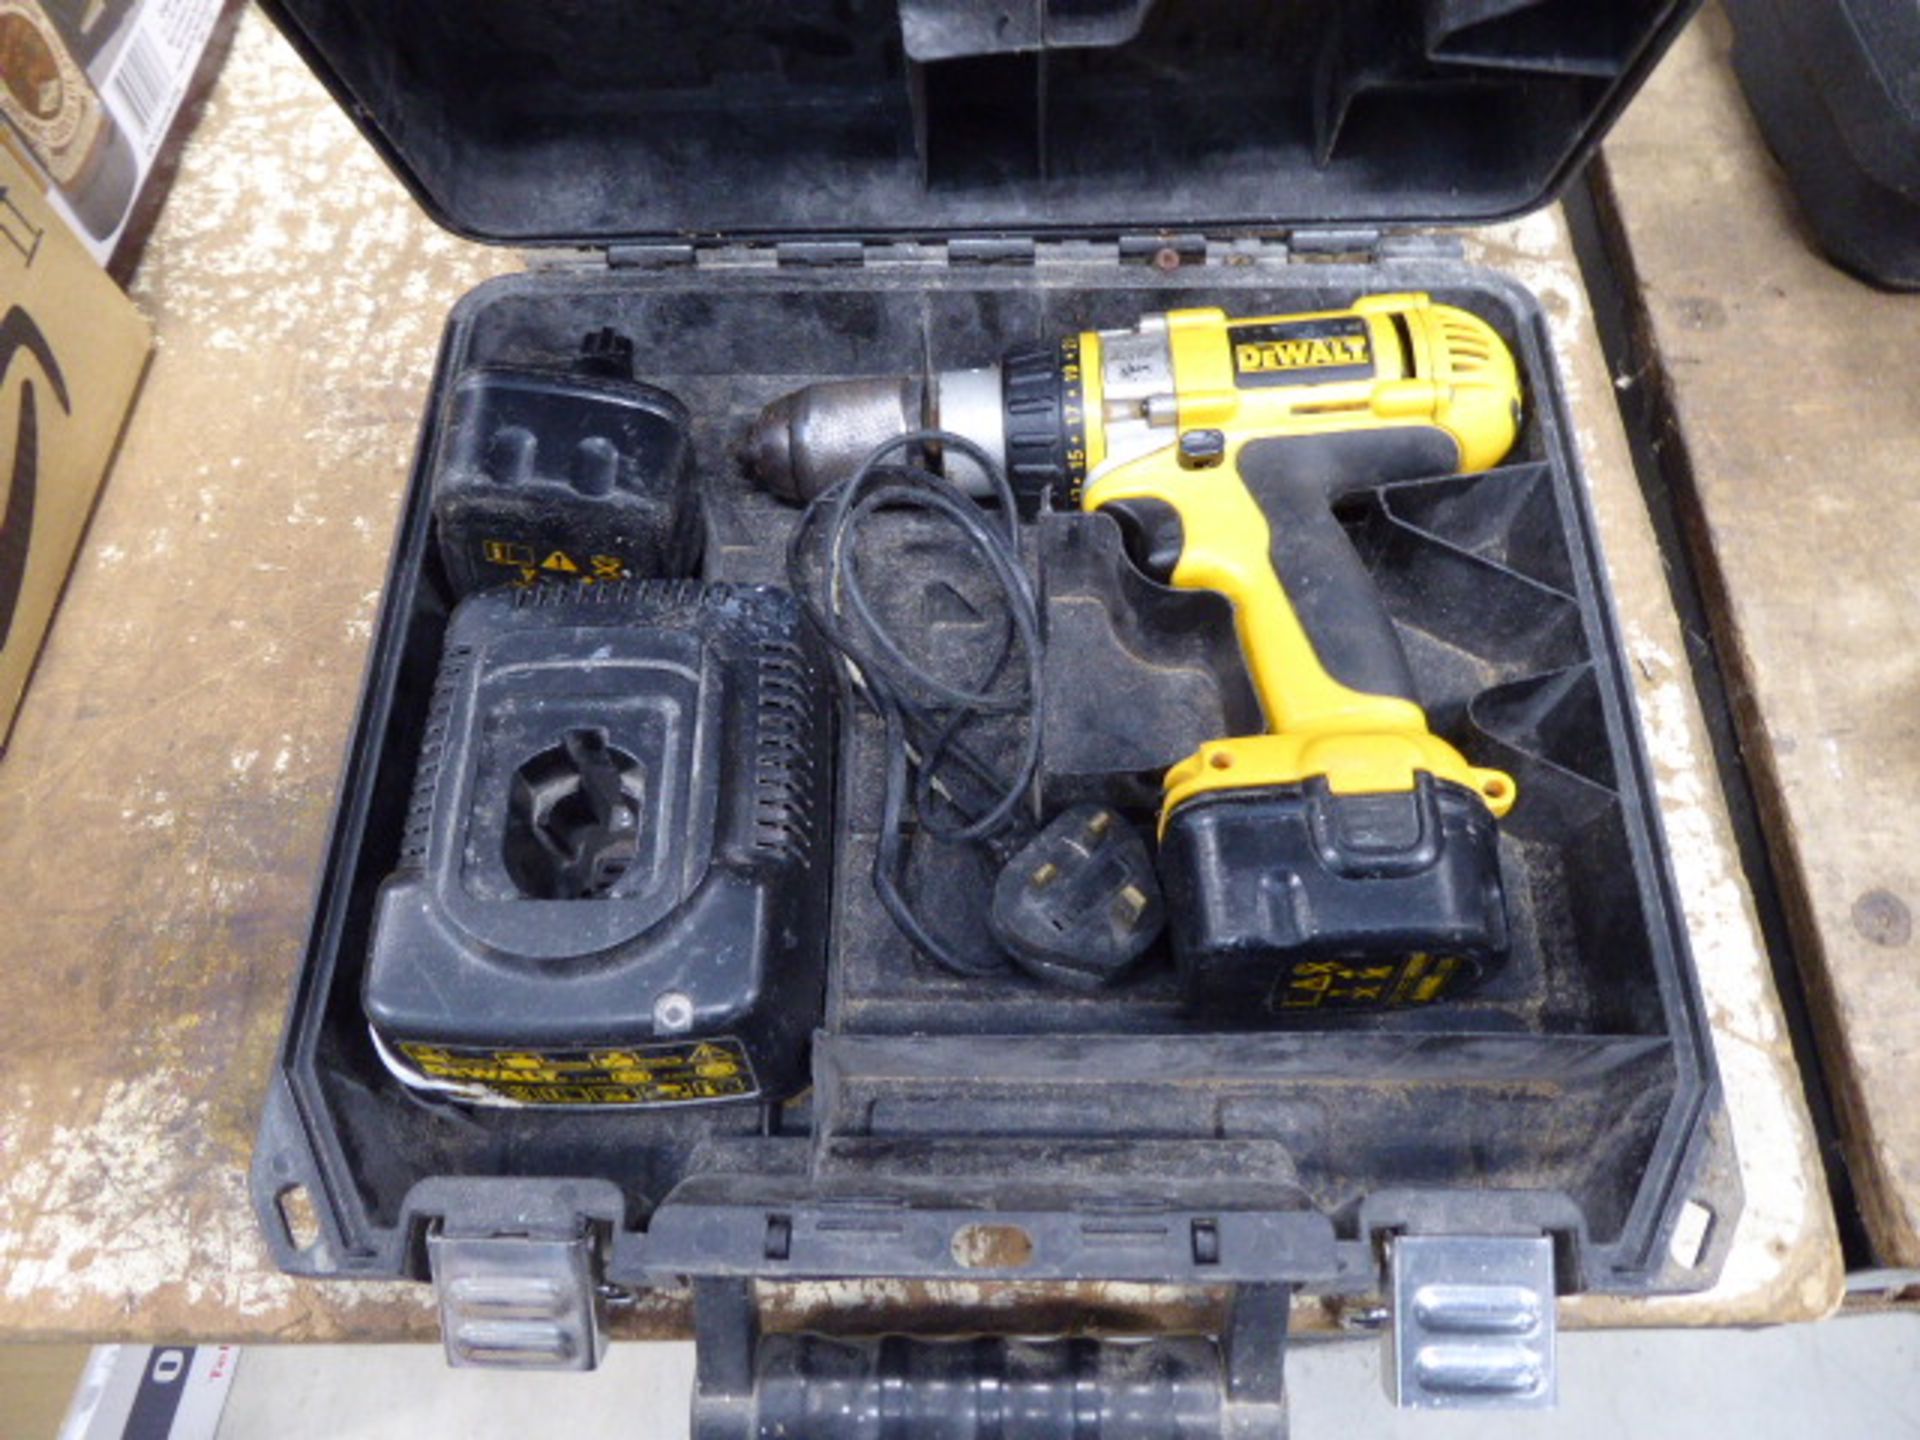 Dewalt 12v battery drill with 2 batteries and charger